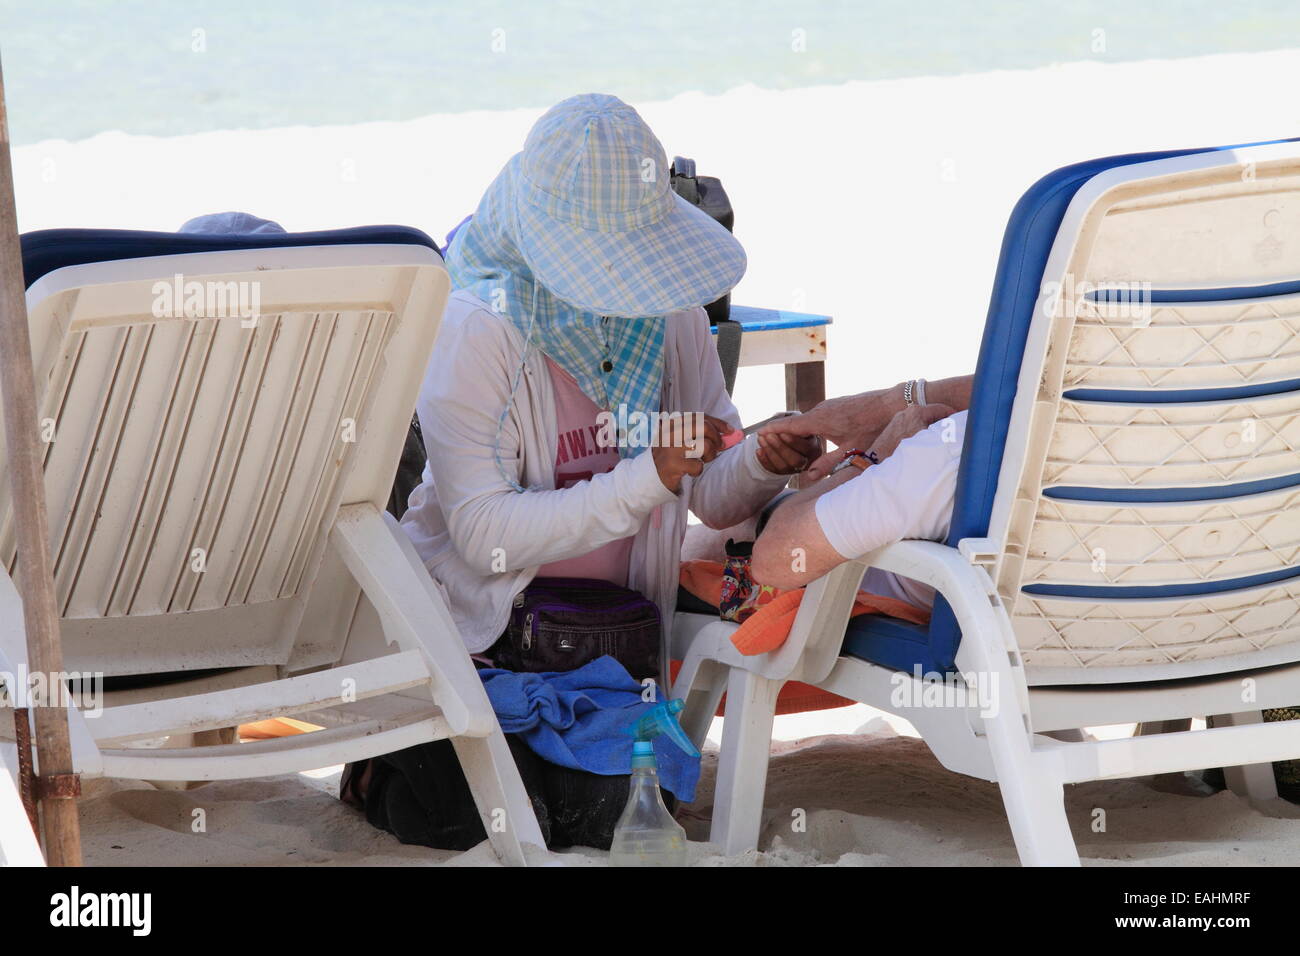 Thai woman wearing hat making nail manicure pedicure to a man on the chaise longue (day bed) at the beach. Pattaya, Thailand Stock Photo